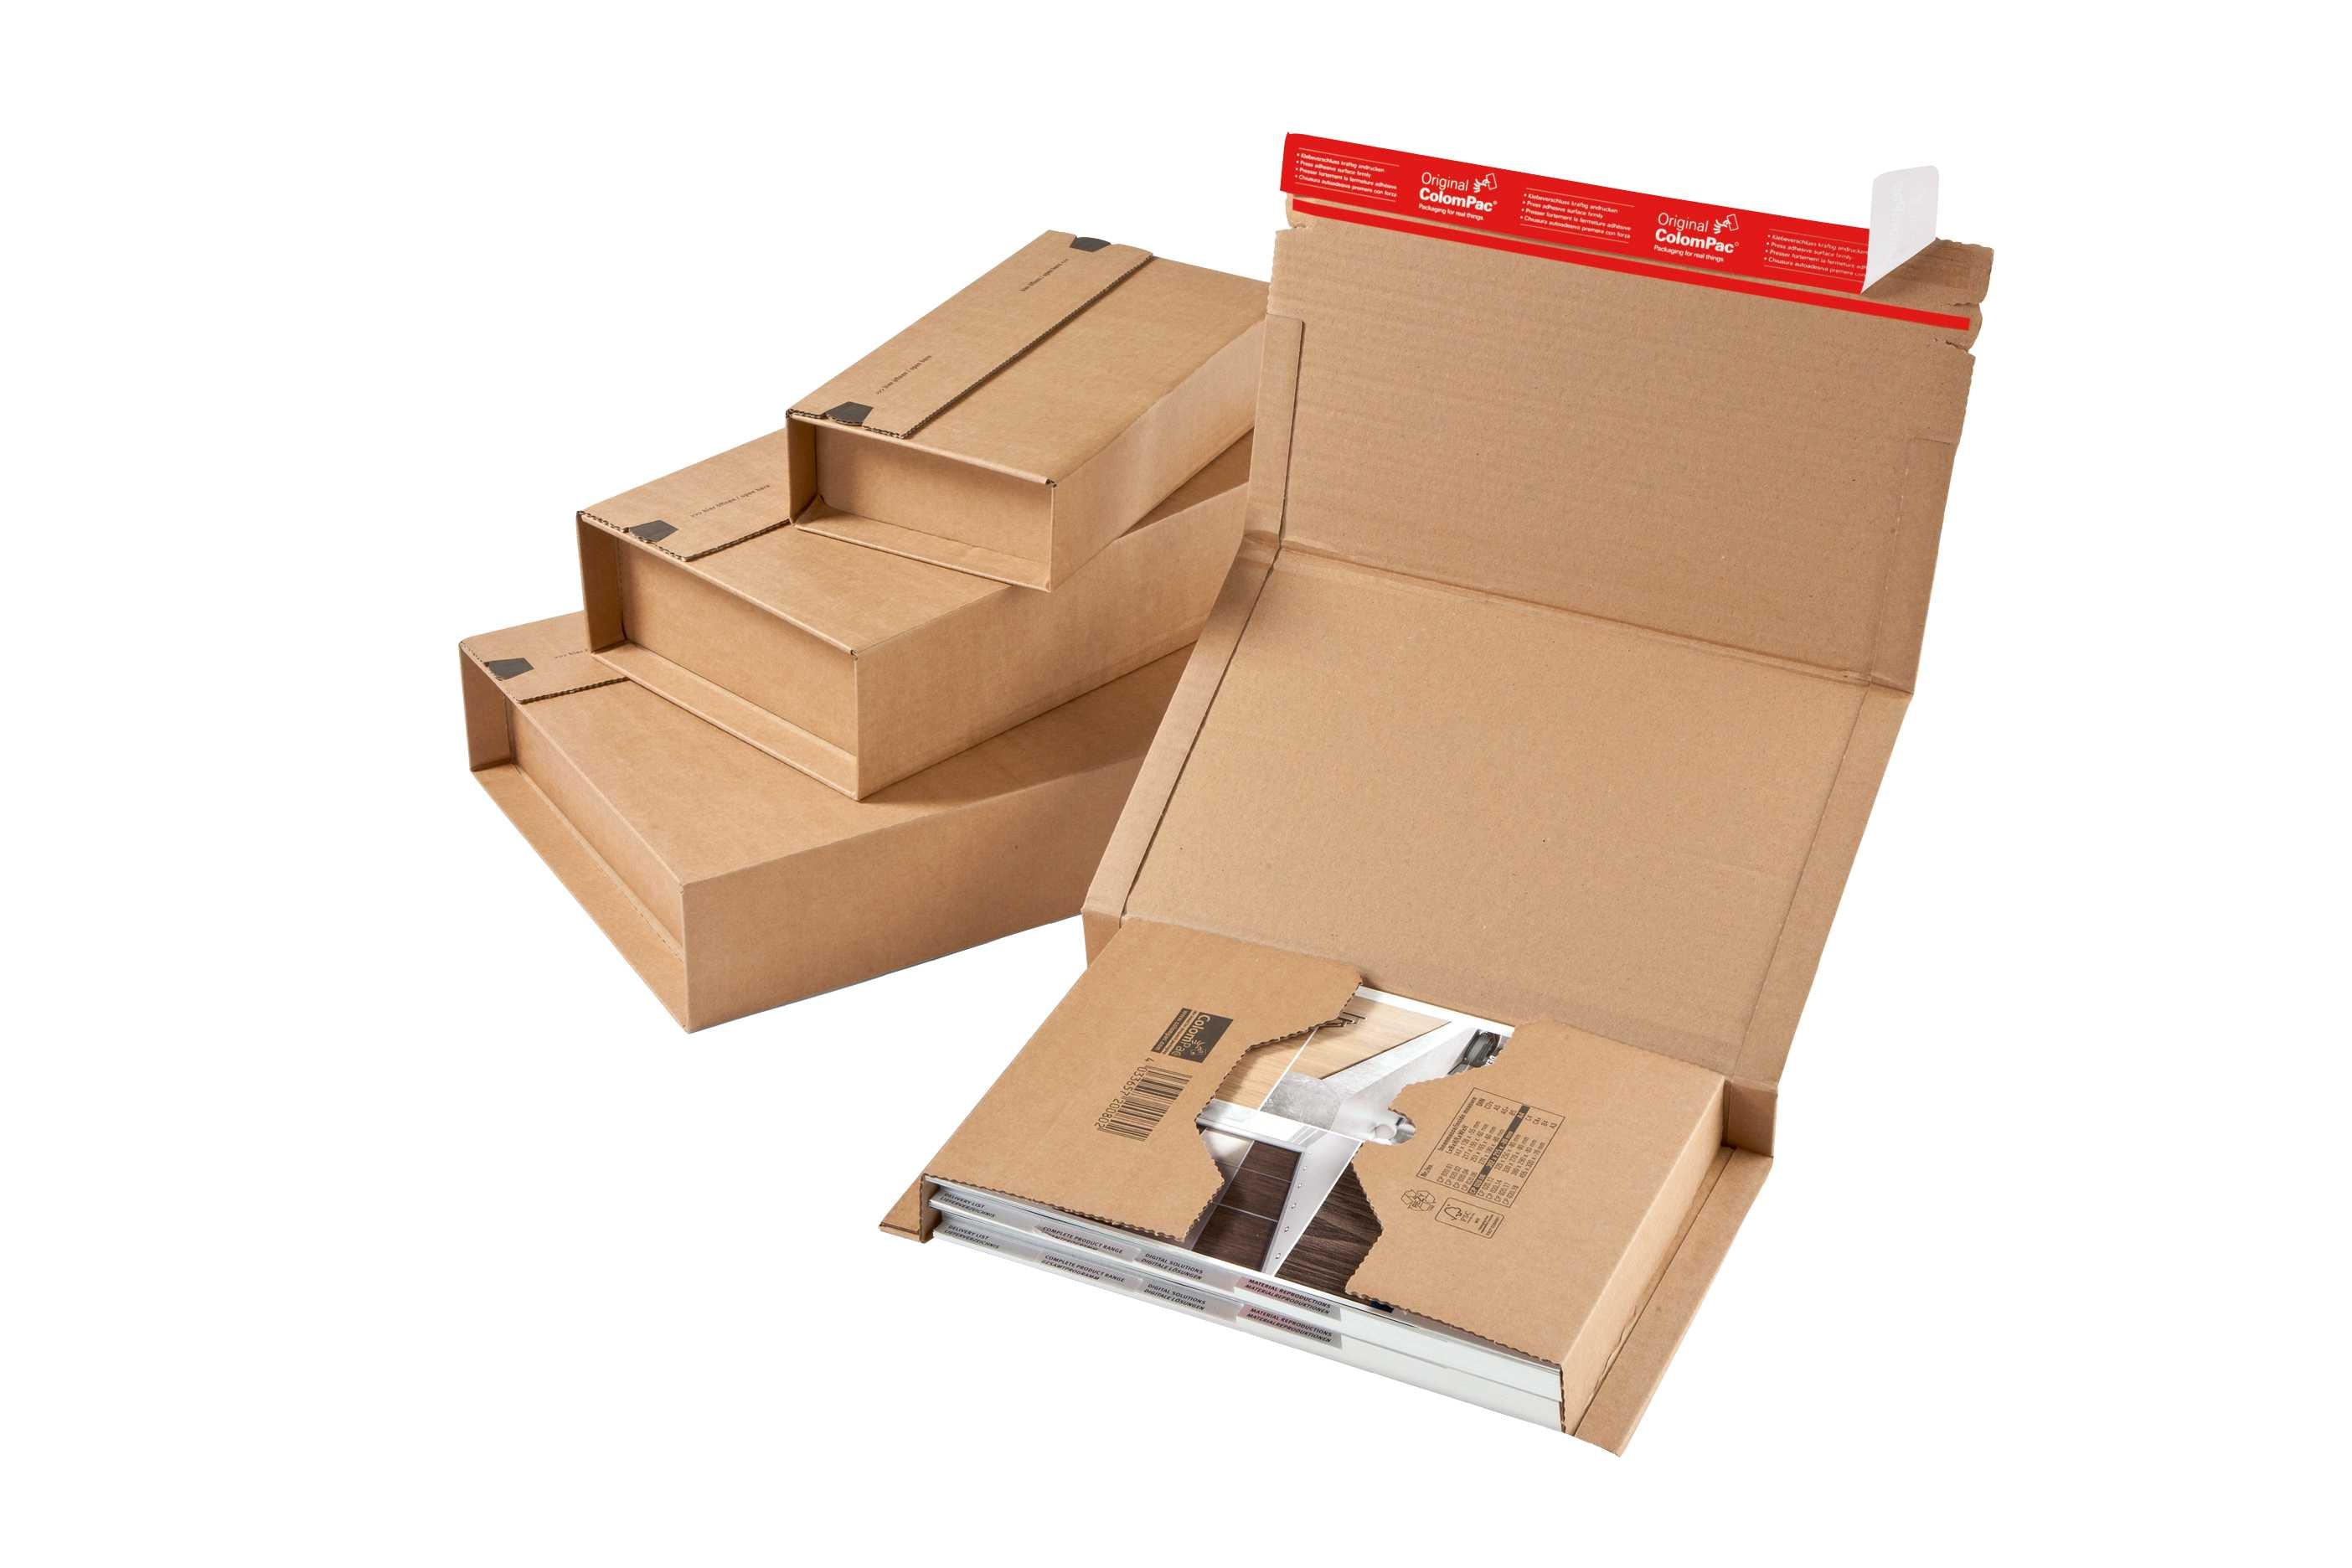 Ship your books safely